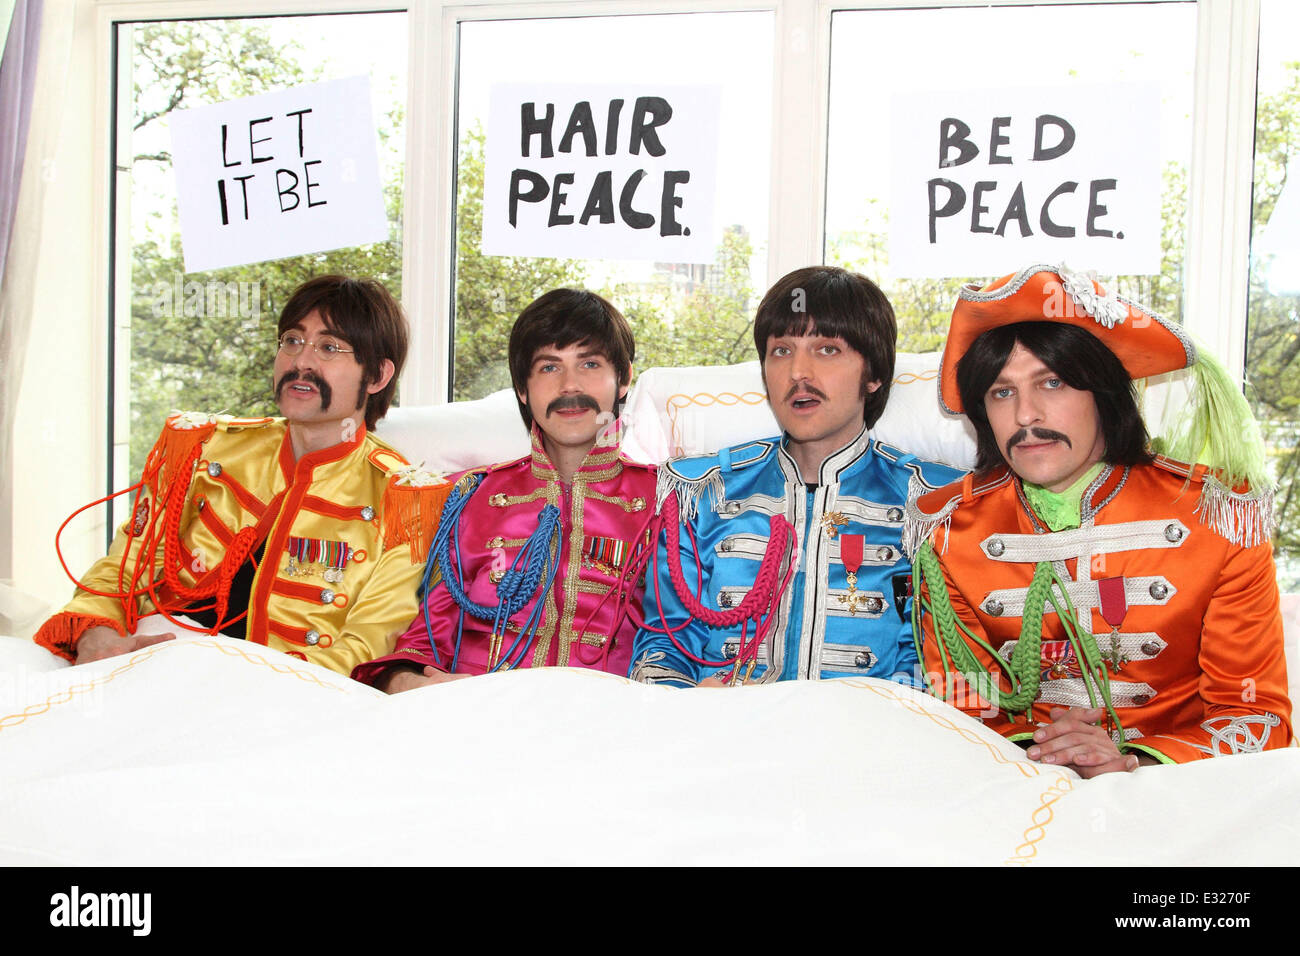 The cast of Beatles show 'LET IT BE' recreate the John Lennon and Yoko  Ono's famous 'bed-in' scene, dressed in full Sgt Pepper costume to coincide  with the announcement that the show